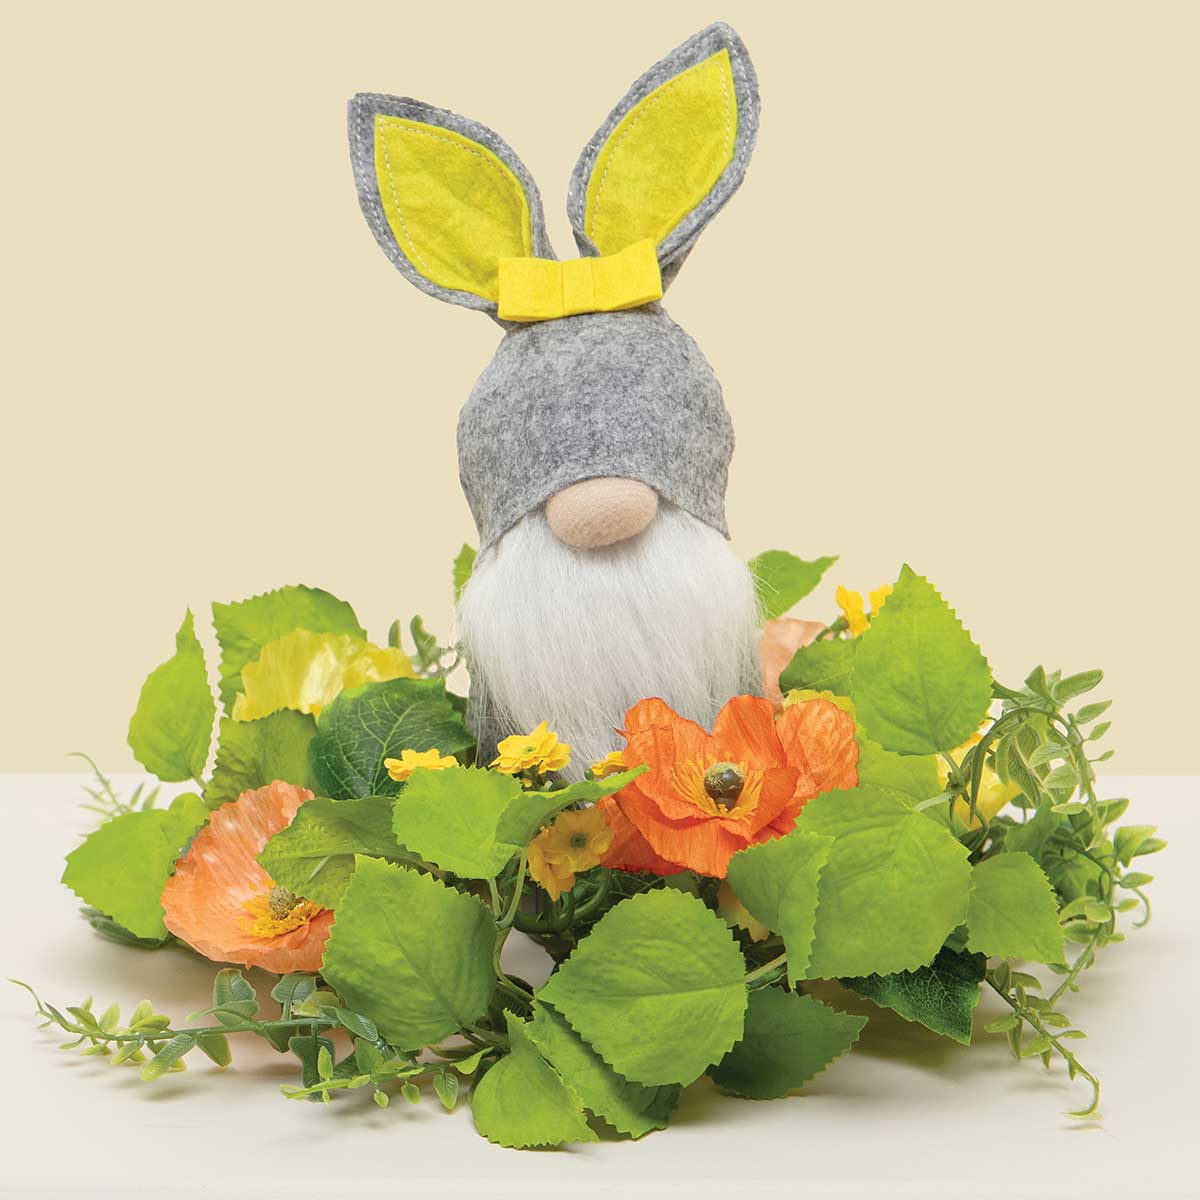 b70 GNOME BUNNY 2 ASSORTED 4.75IN X 4IN X 8.25IN - Click Image to Close